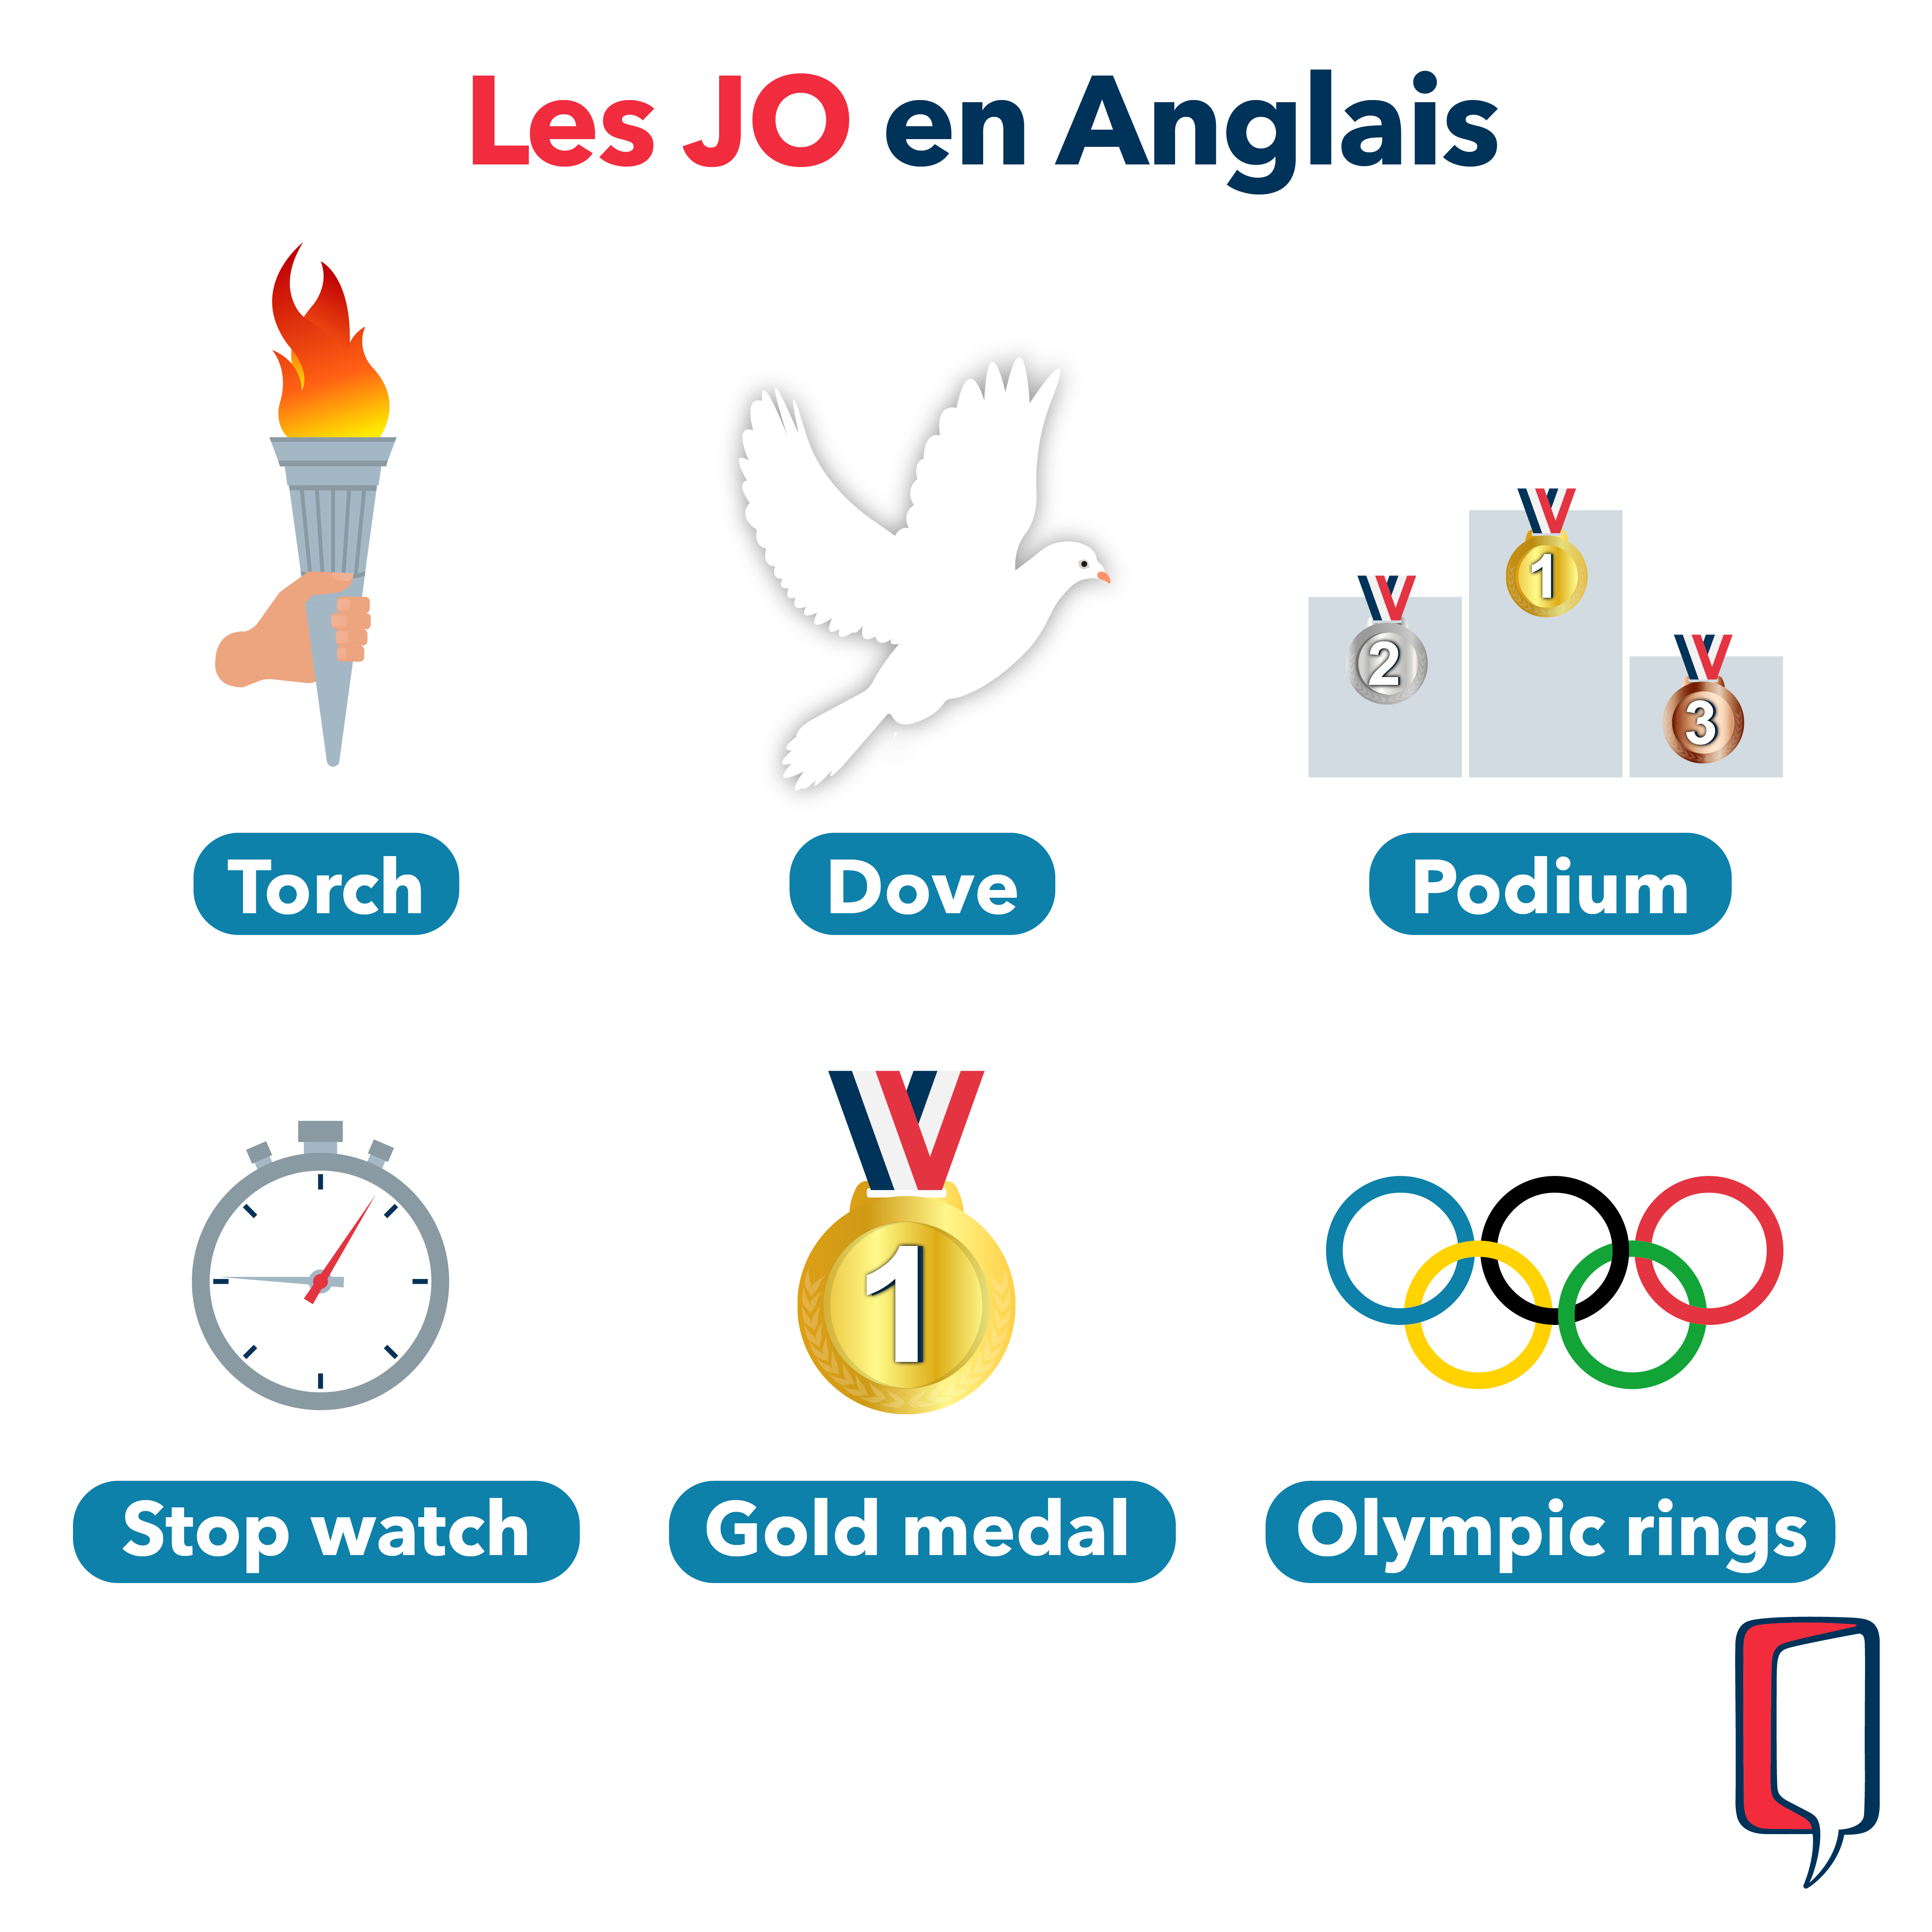 Les JO en anglais : Torch, Dove, Podium, stop watch, gold medal, Olympic rings